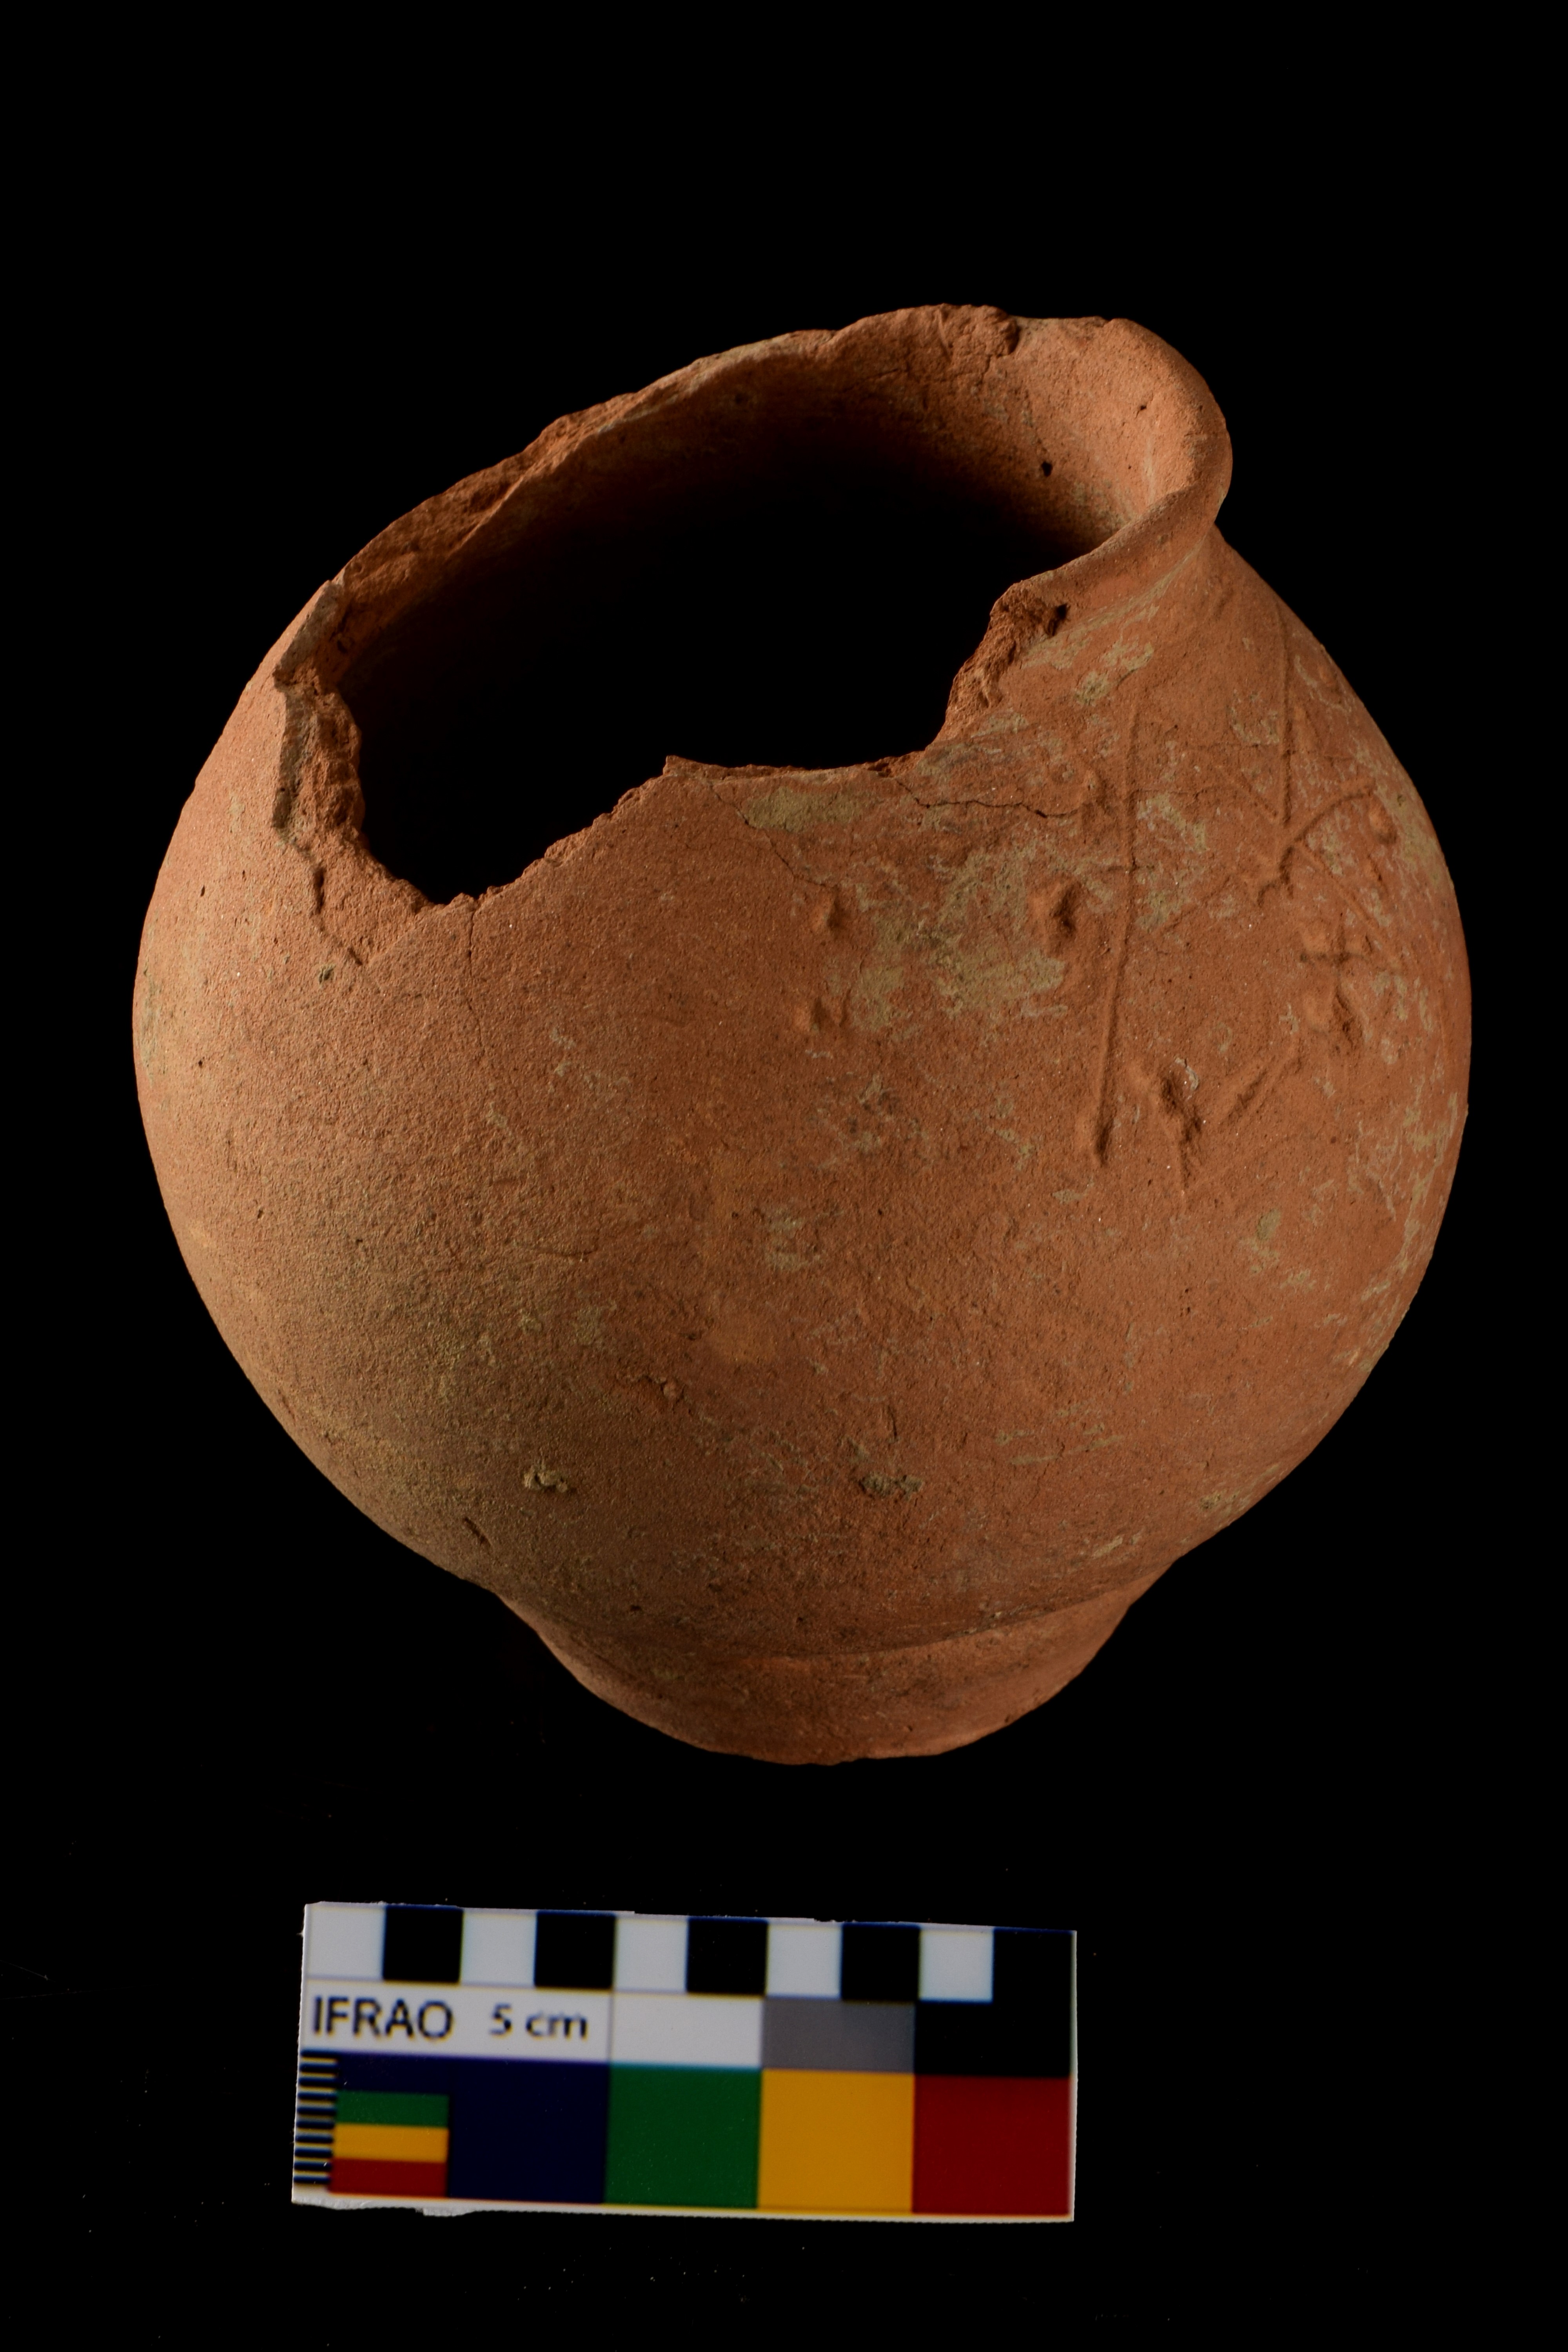 Globular pot found near the head of the skeleton that yielded ancient DNA. (Vasant Shinde/Deccan College Post Graduate Research Institute)